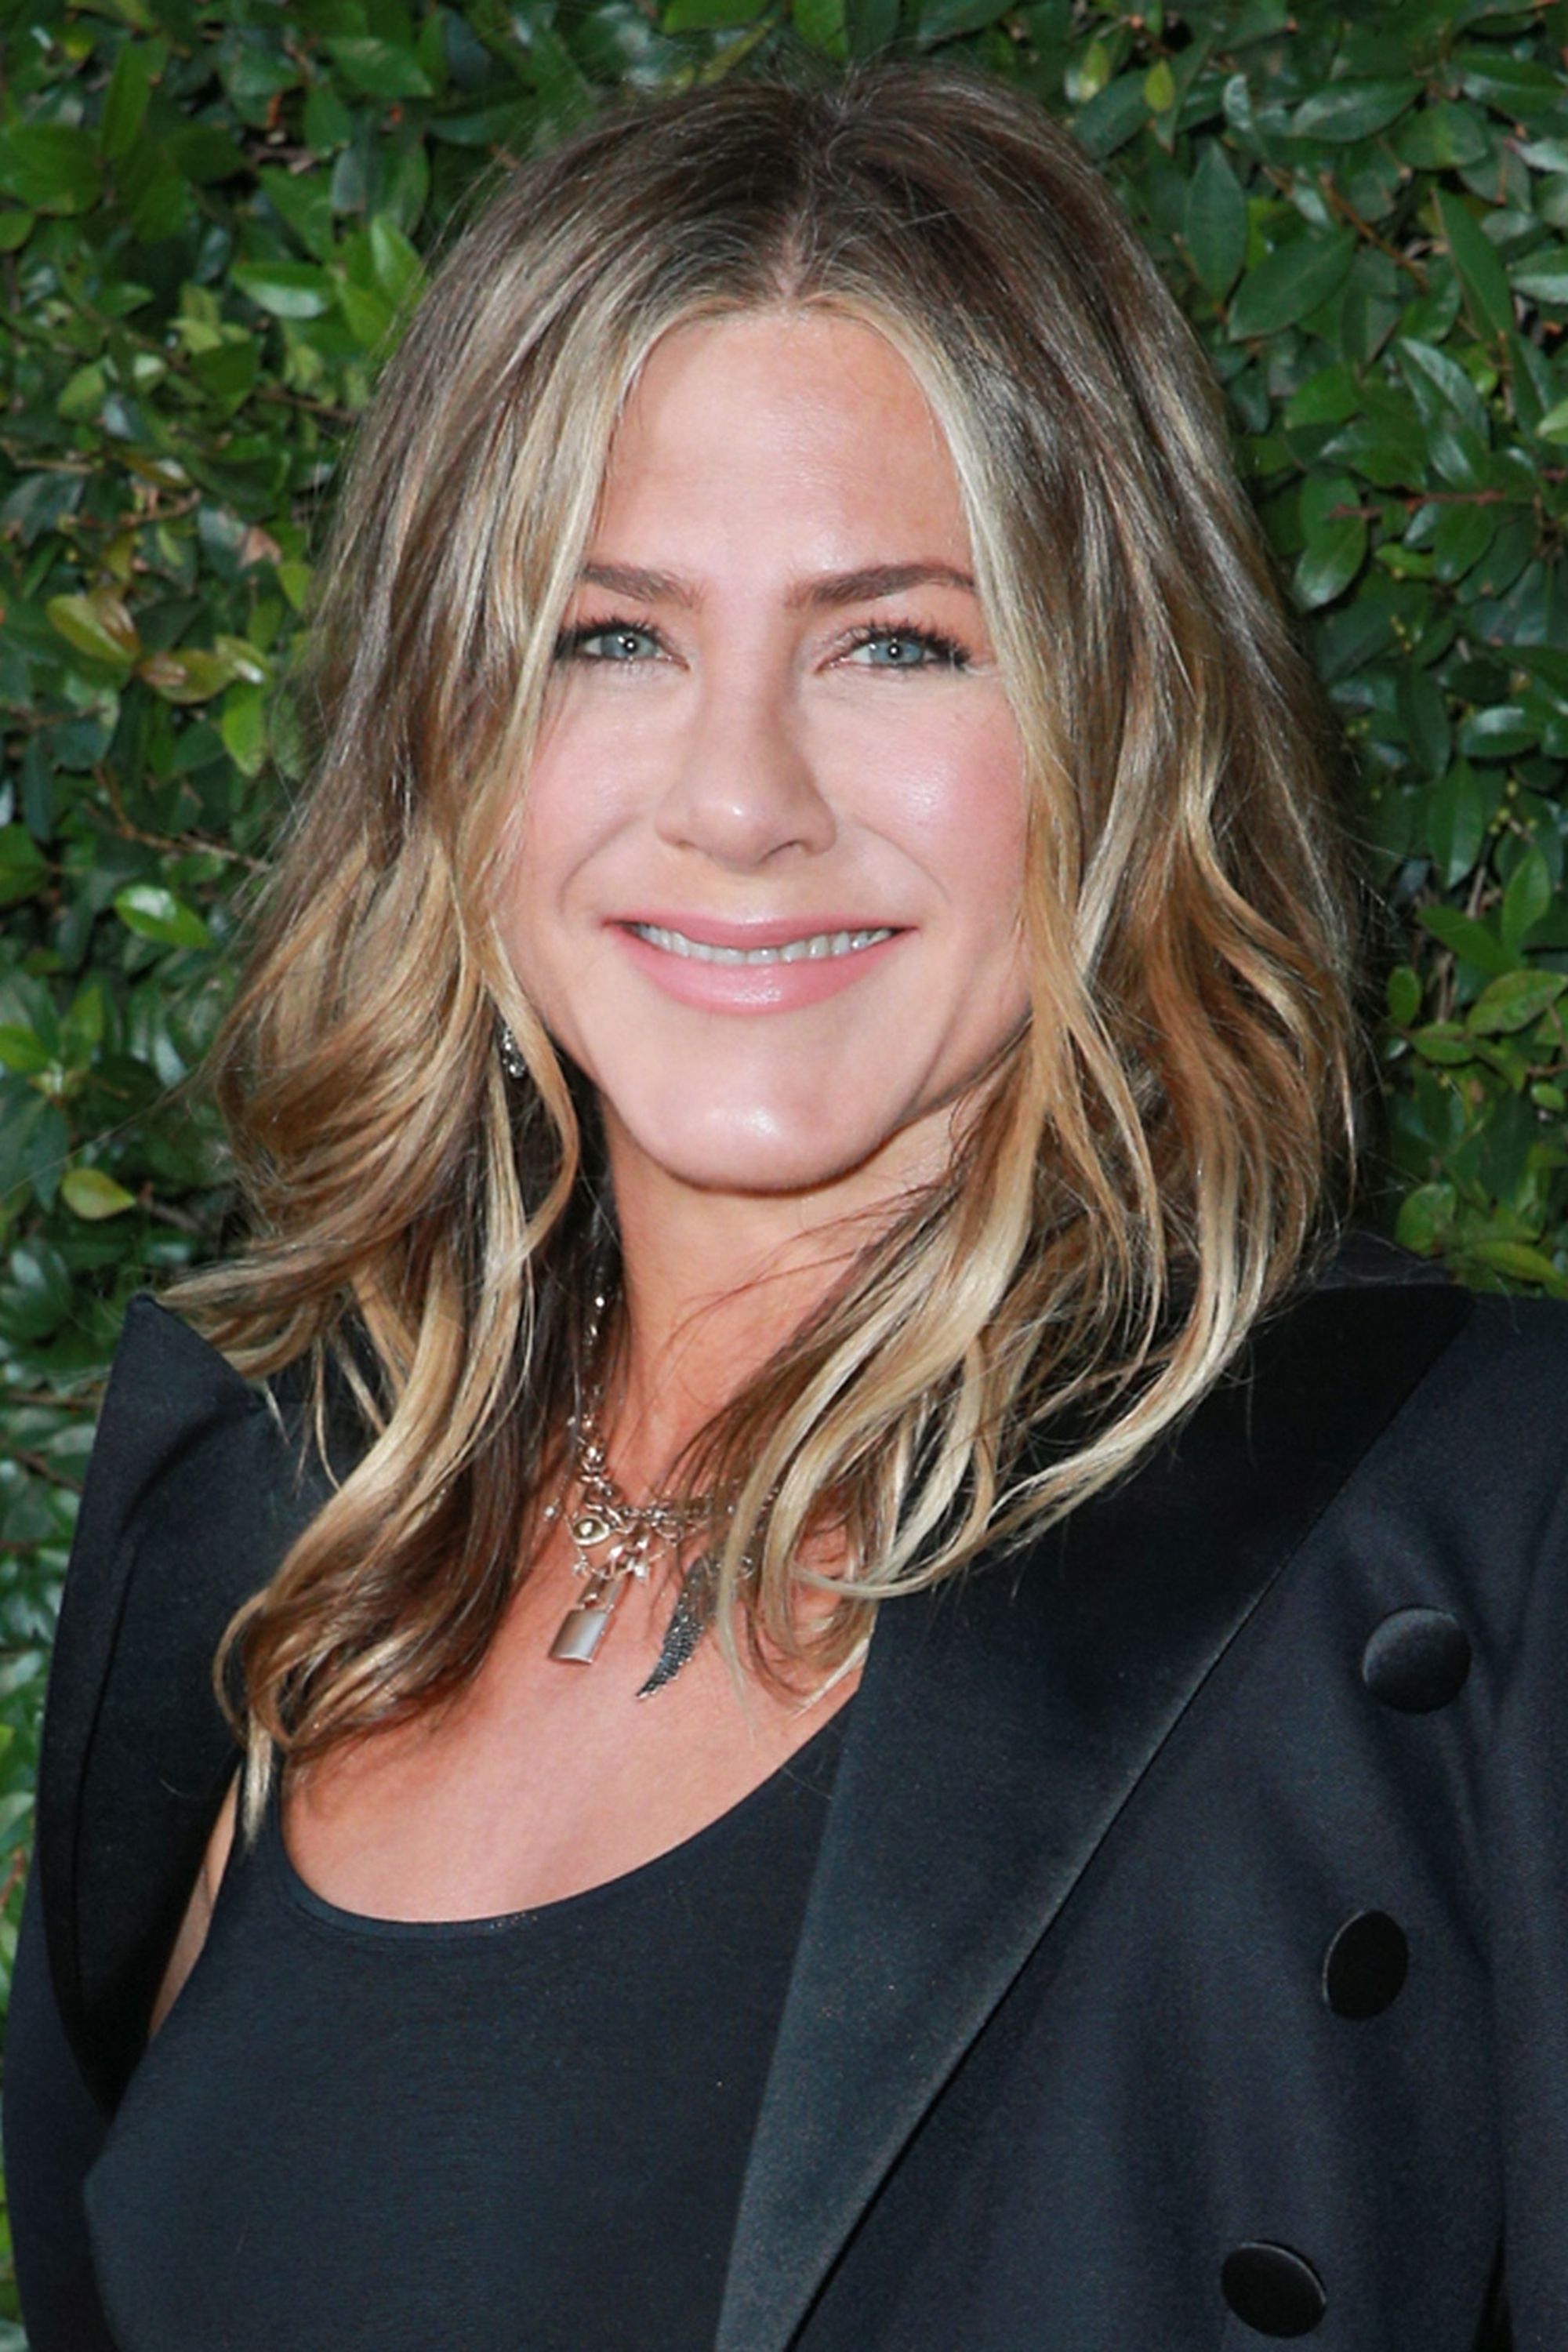 Every Single Hairstyle Jennifer Aniston Has Ever Had